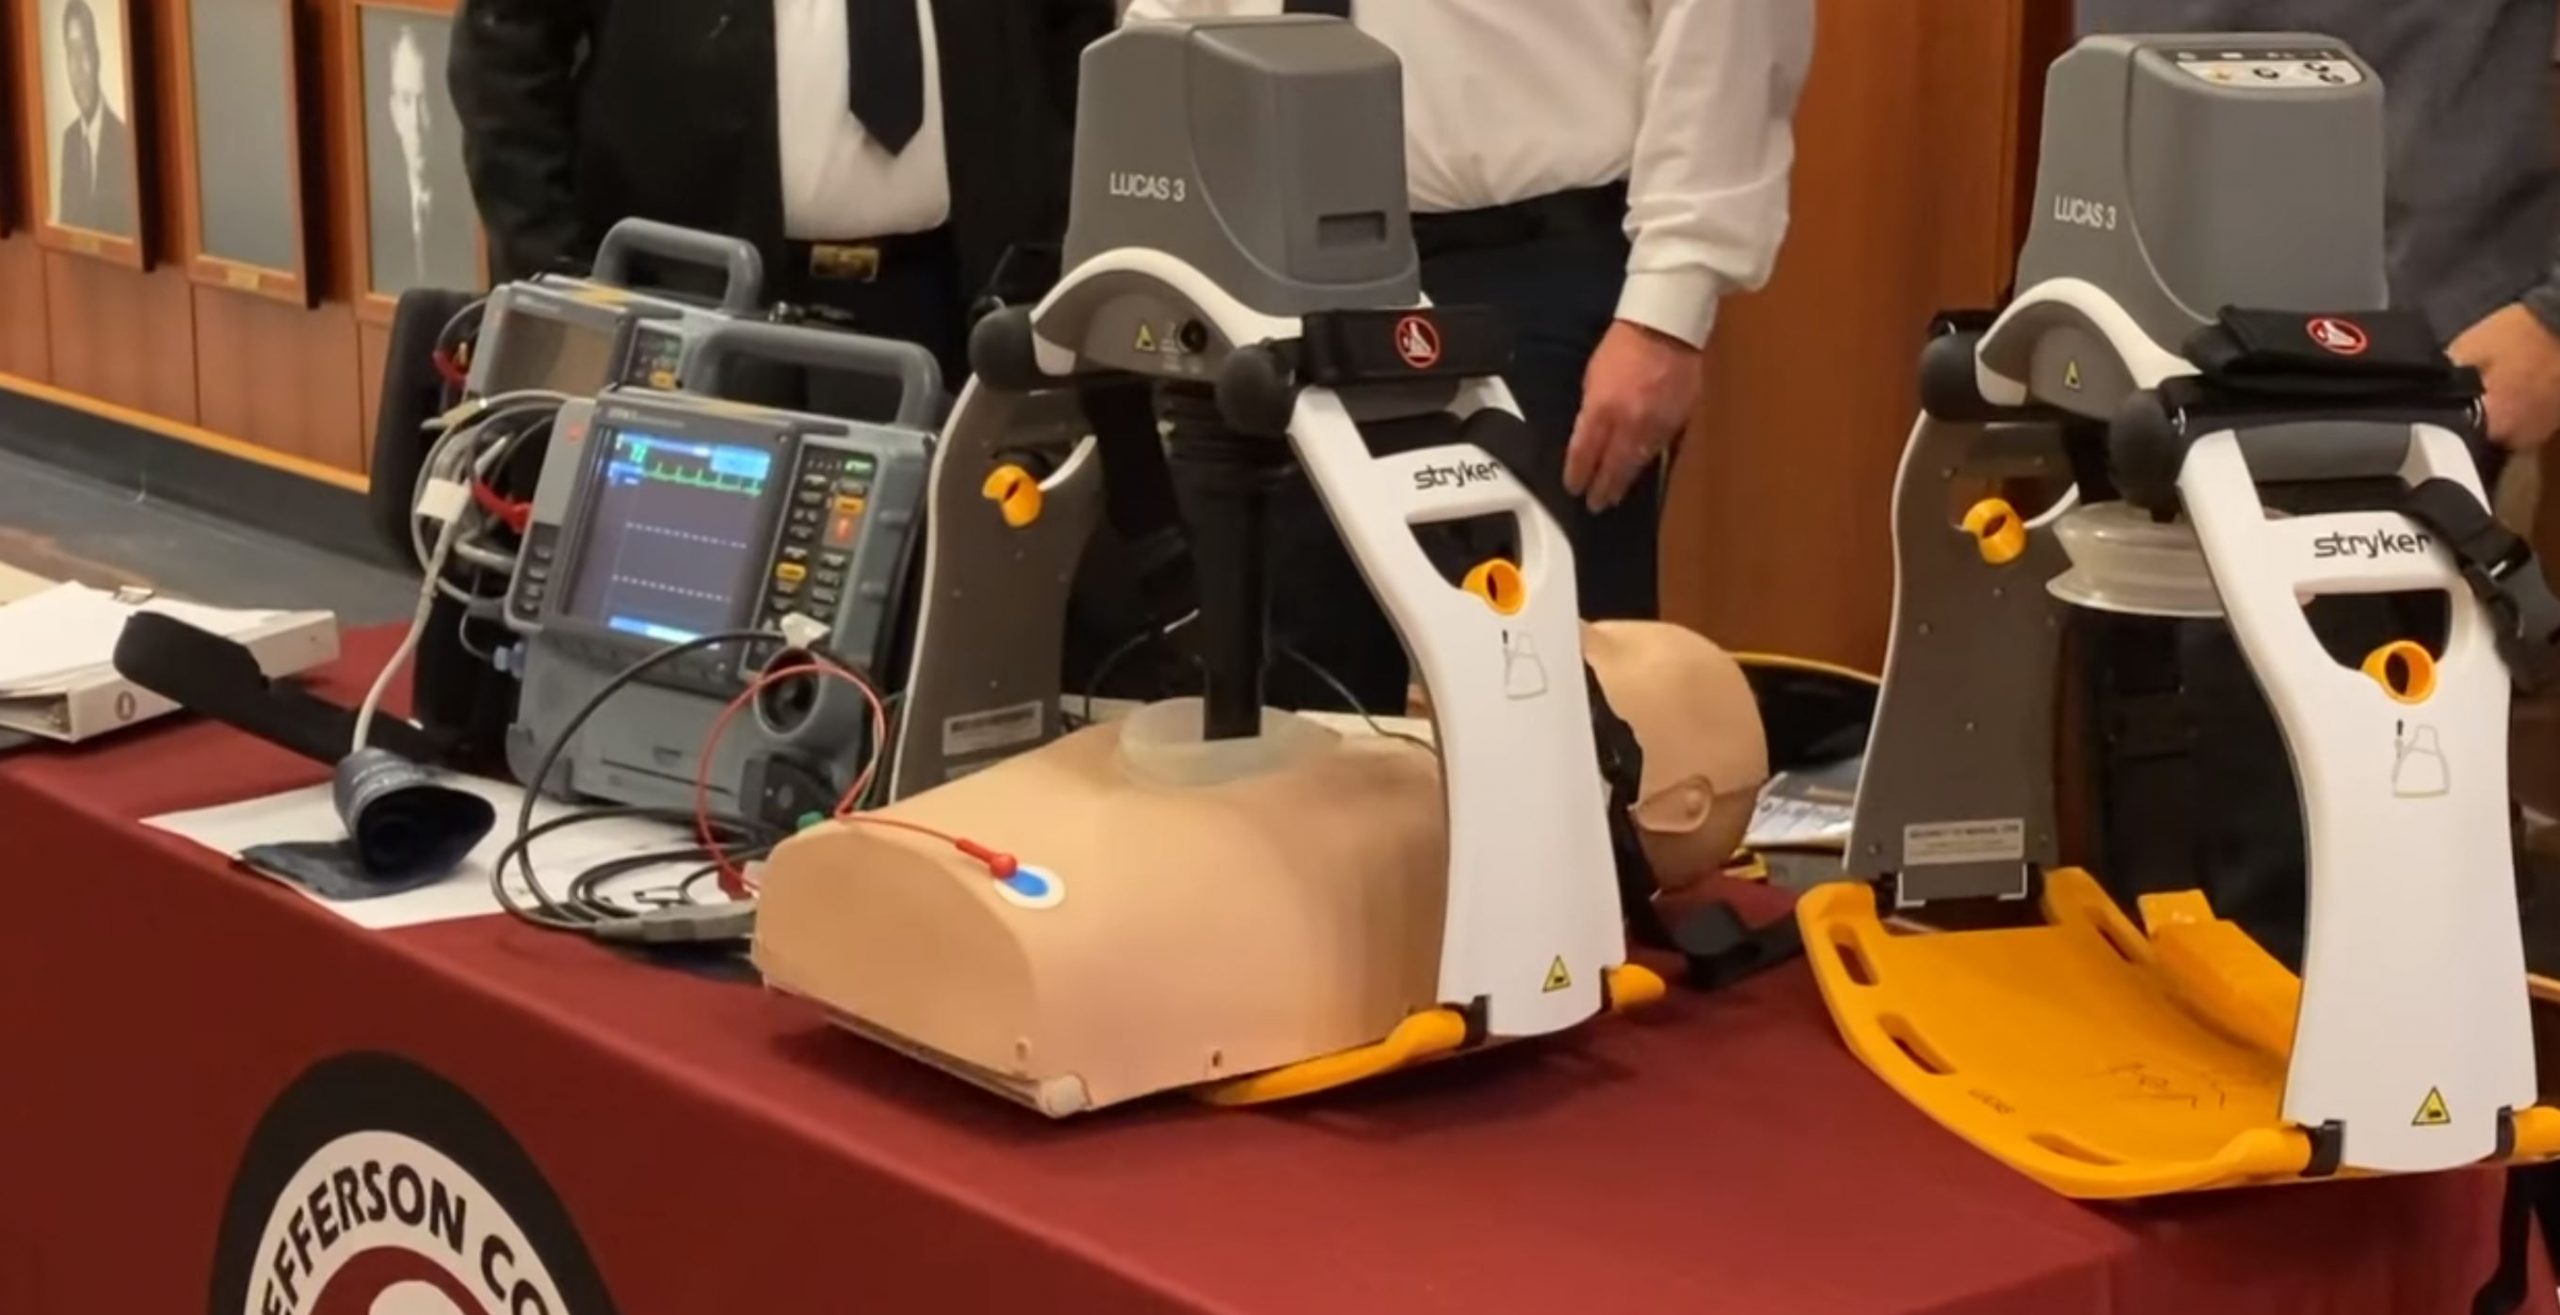 VIDEO: Center Point Fire District receives new life-saving equipment with CARES Act funding